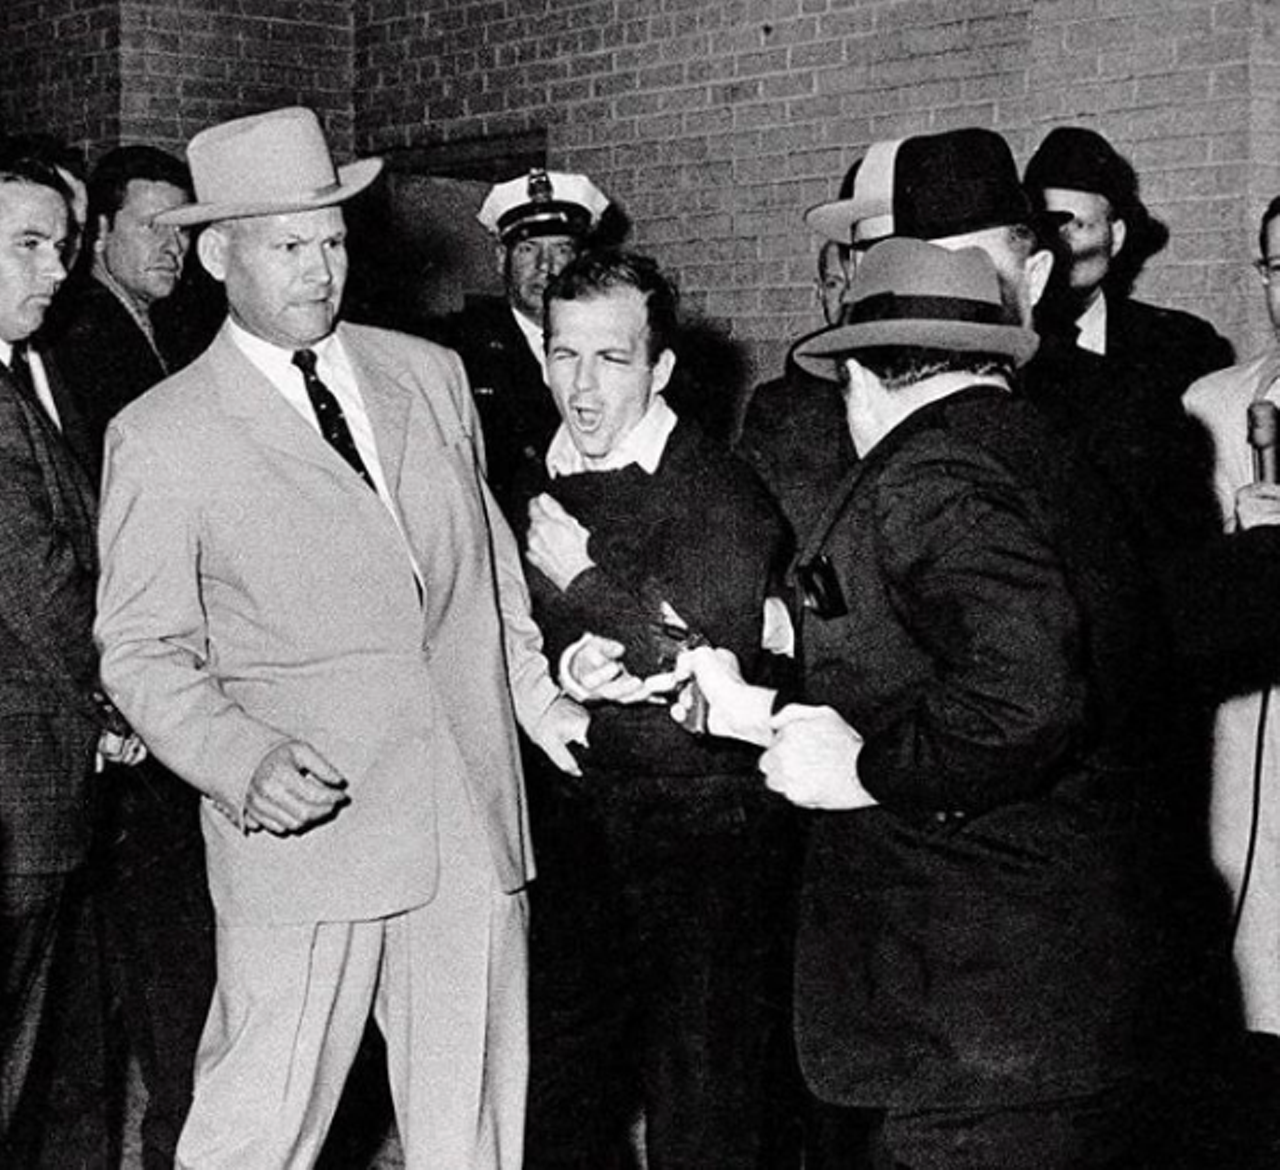 Lee Harvey Oswald
Lee Harvey Oswald is definitely not famous for a good reason. If you haven’t already heard his name, you’ll read why in a sec. Lee Harvey Oswald was considered a loner for most of his life and dropped out of school at around 15 or 16. After joining the military, he was court-martialed twice, once for keeping a private weapon without permission and the other for assaulting an NCO. After he was discharged, he would go on to be the accused assassin of JFK and later shot and killed on live TV shortly thereafter. He is buried in Fort Worth at Shannon Rose Hill Memorial Park.
Photo via Bob Jackson / Dallas Times Herald